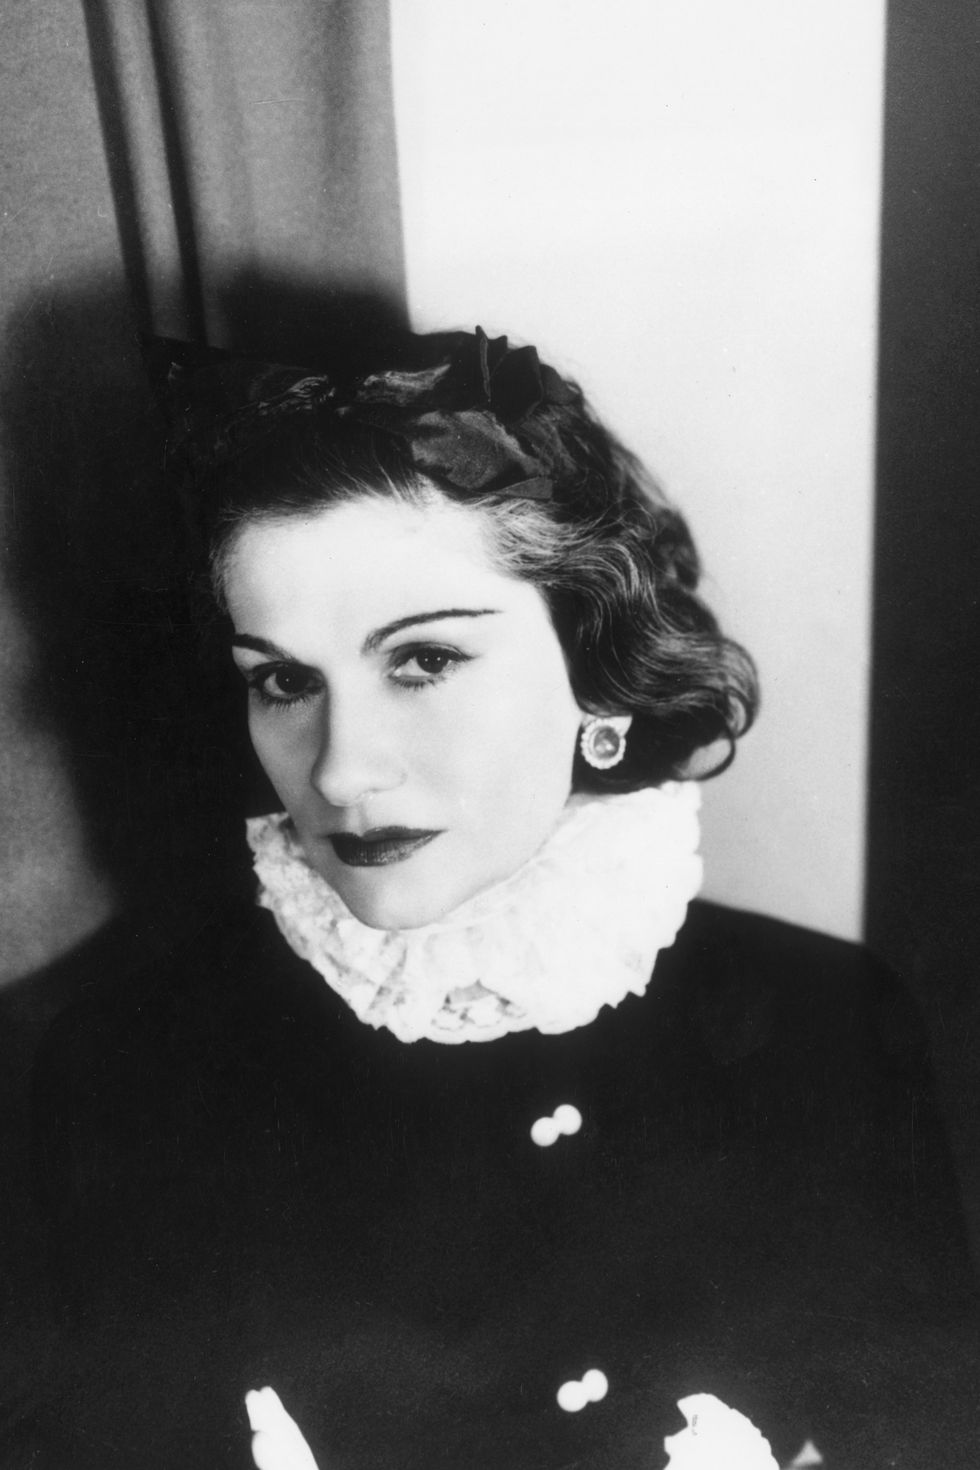 <p>The ultimate classic designer, Coco Chanel defined the notion of staples that would last a lifetime. The little black dress. The tweed jacket. The statement cocktail necklace. But it was jersey fabric that would put the French designer on the map.  Starting her career during World War I,  she was the first mainstream designer to use the material, typically reserved for underwear, throughout her collection. And she became one of the first to fashion designs that were boxy, shorter and easier to move in, freeing women from their tight corsets and Poiret-inspired skirts. She expanded her brand throughout the years, and her well-loved perfumes, including the famous No. 5, remain the go-tos of every girl in search of glamour. <br></p>